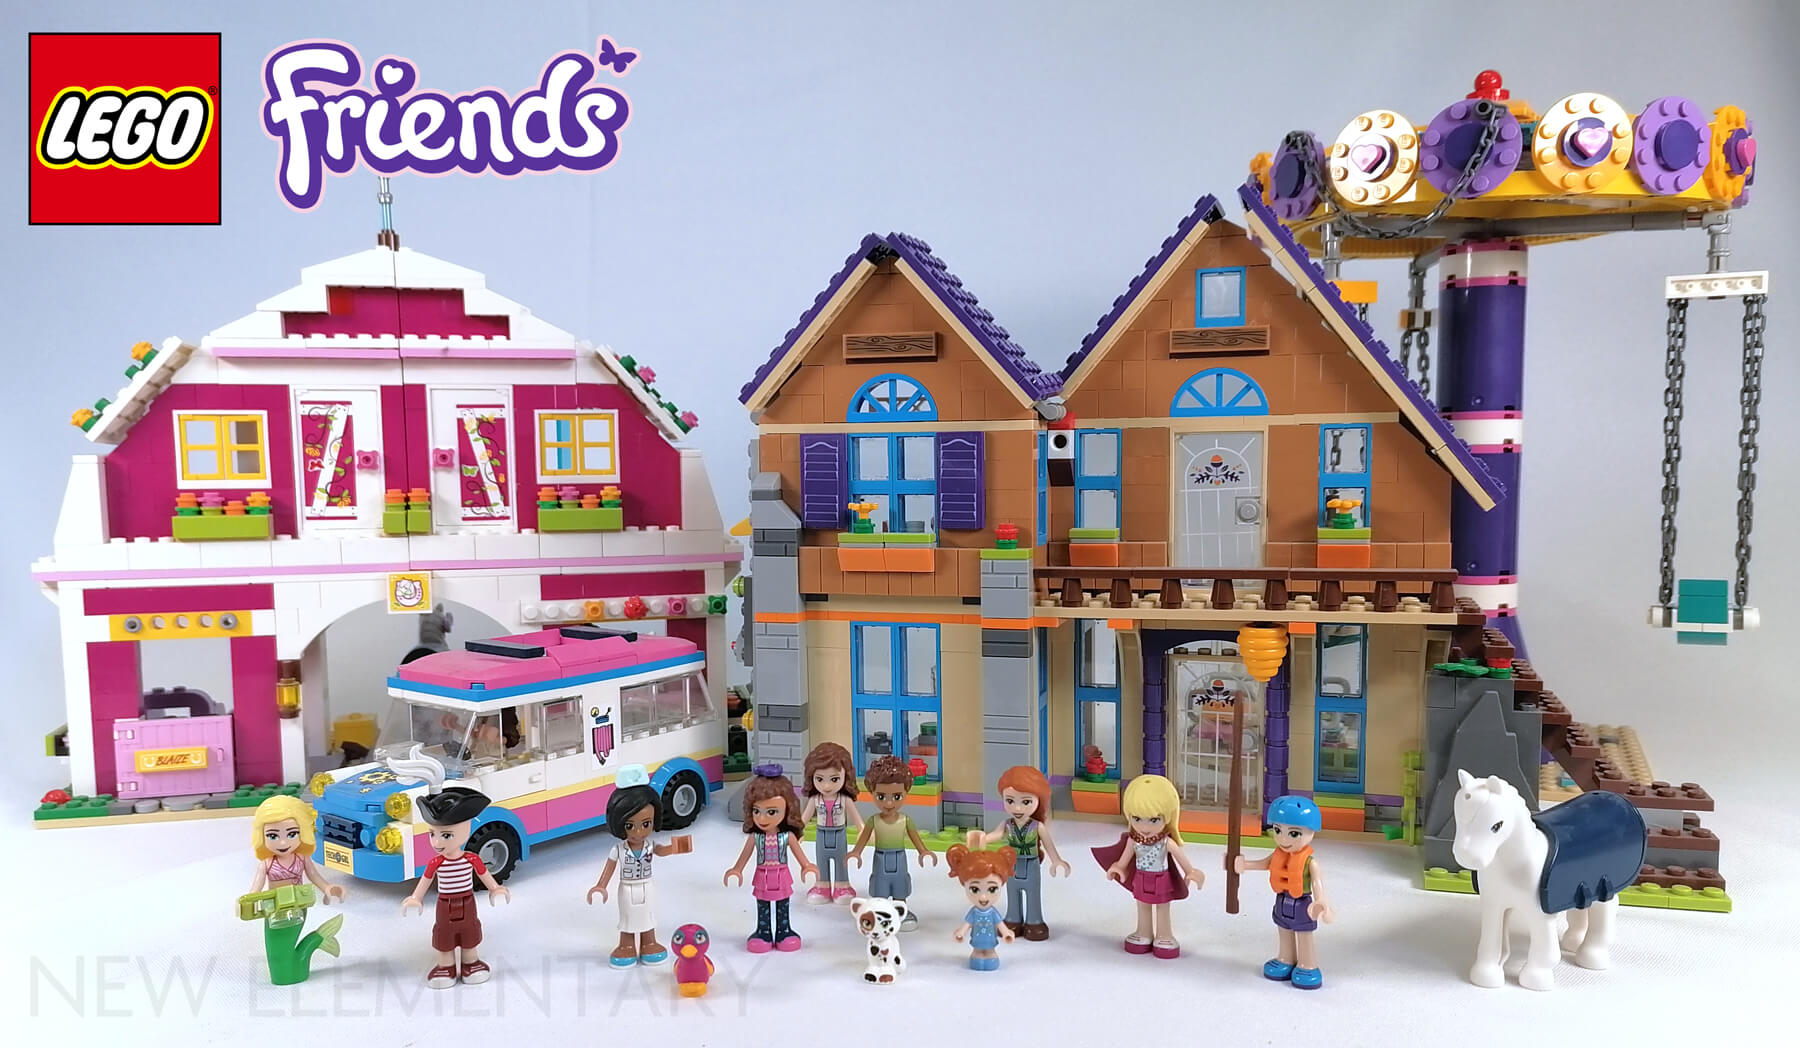 F.Kr. Indflydelsesrig bassin Old Elementary: 10 years of LEGO® Friends | New Elementary: LEGO® parts,  sets and techniques